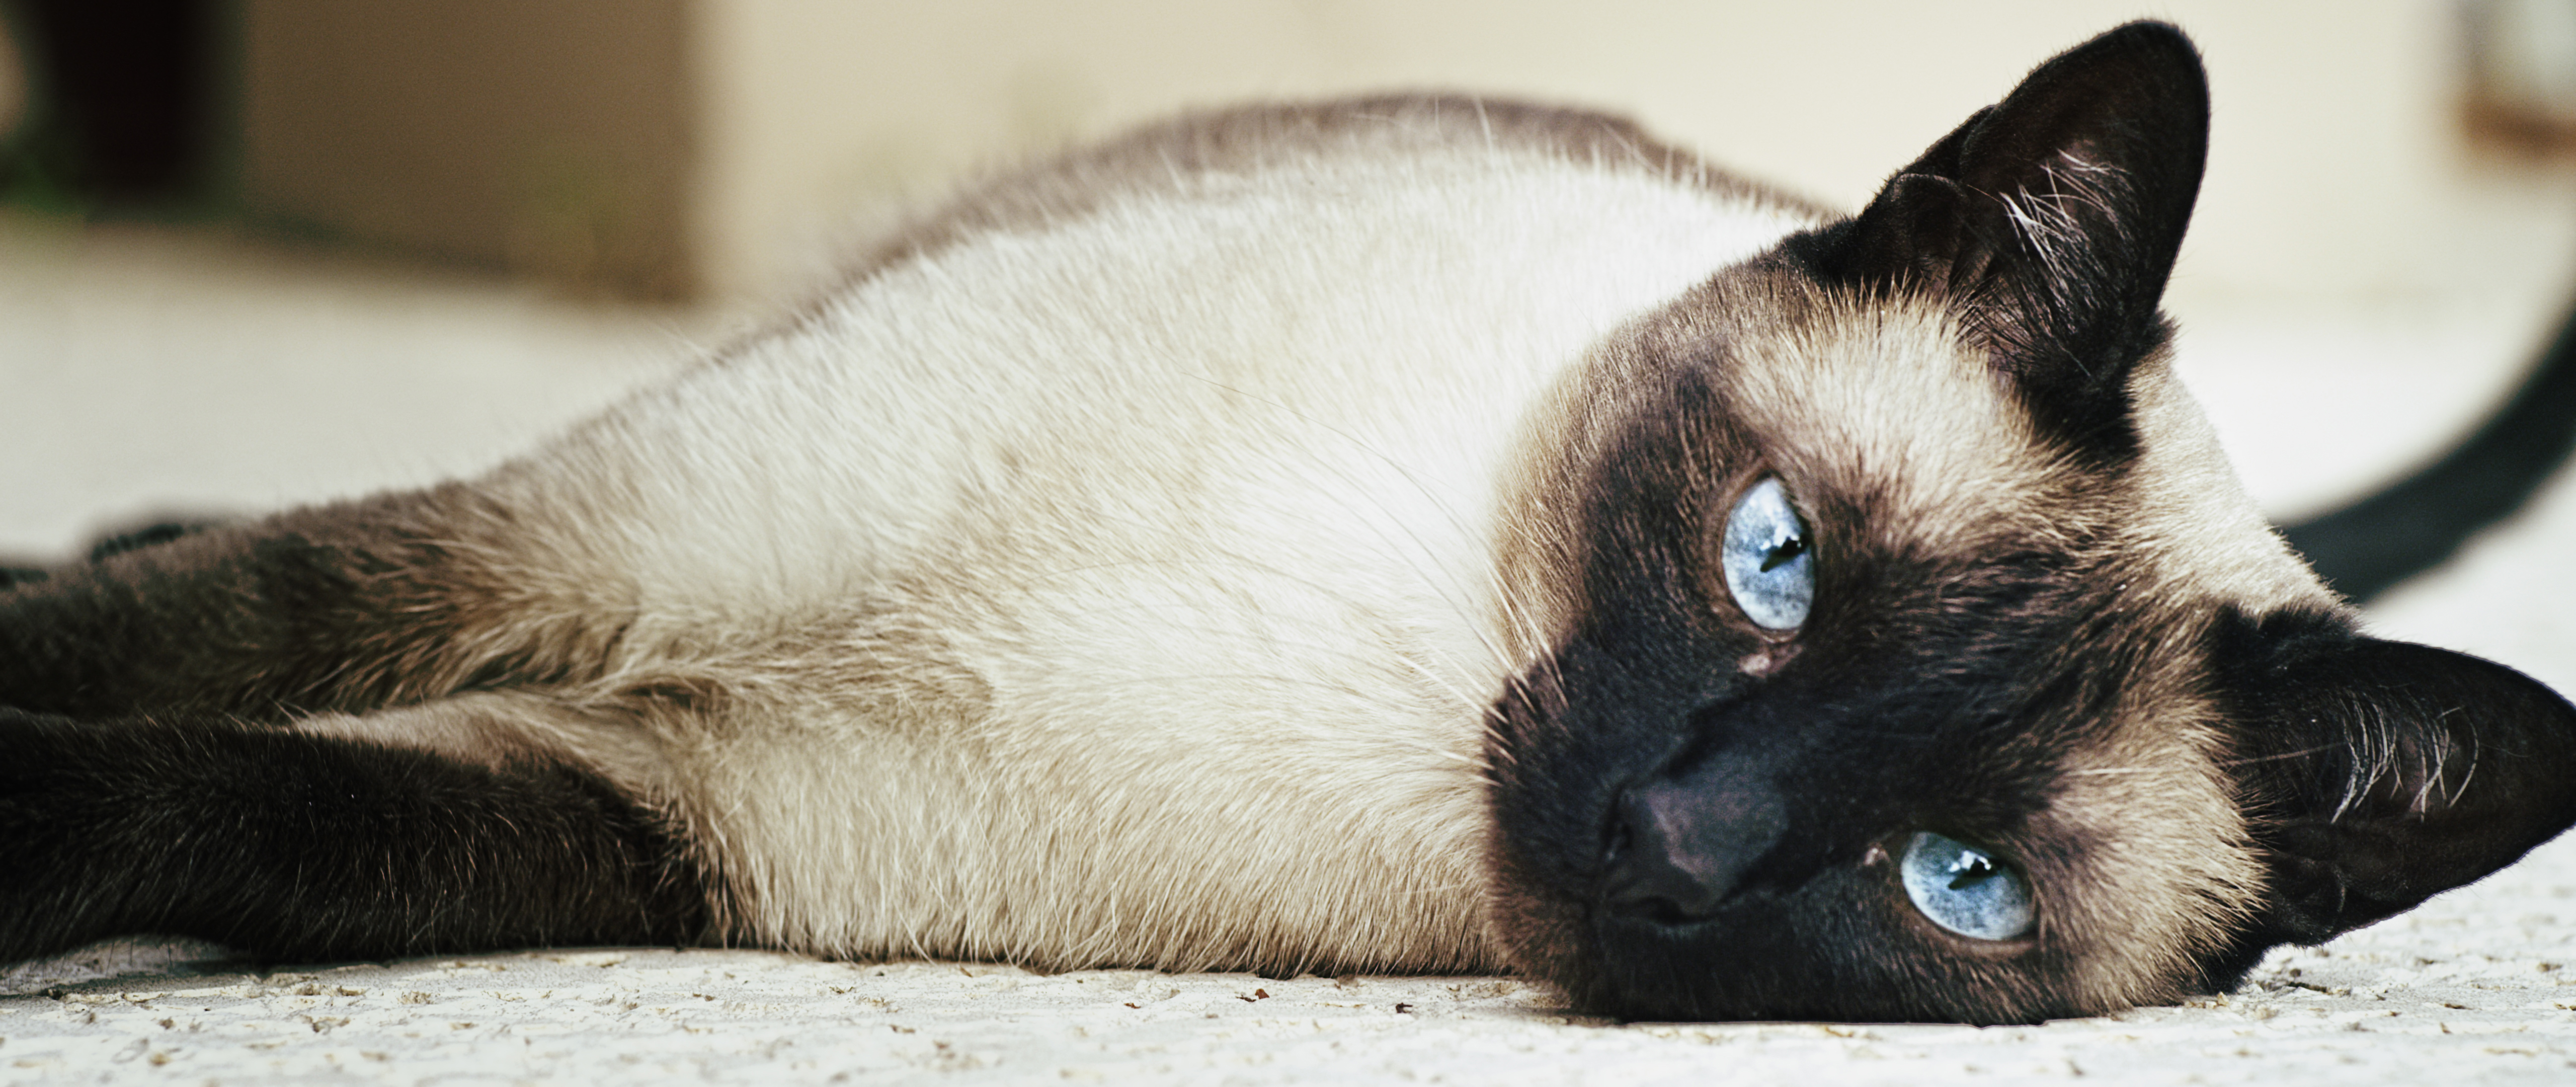 Siamese Cat Coats Are Temperature Dependent The Enzyme That Catalyses The Reaction To Create The Pigment Denatures At High Temperatures Therefore The Only Places Where The Pigment Can Be Produced Are The